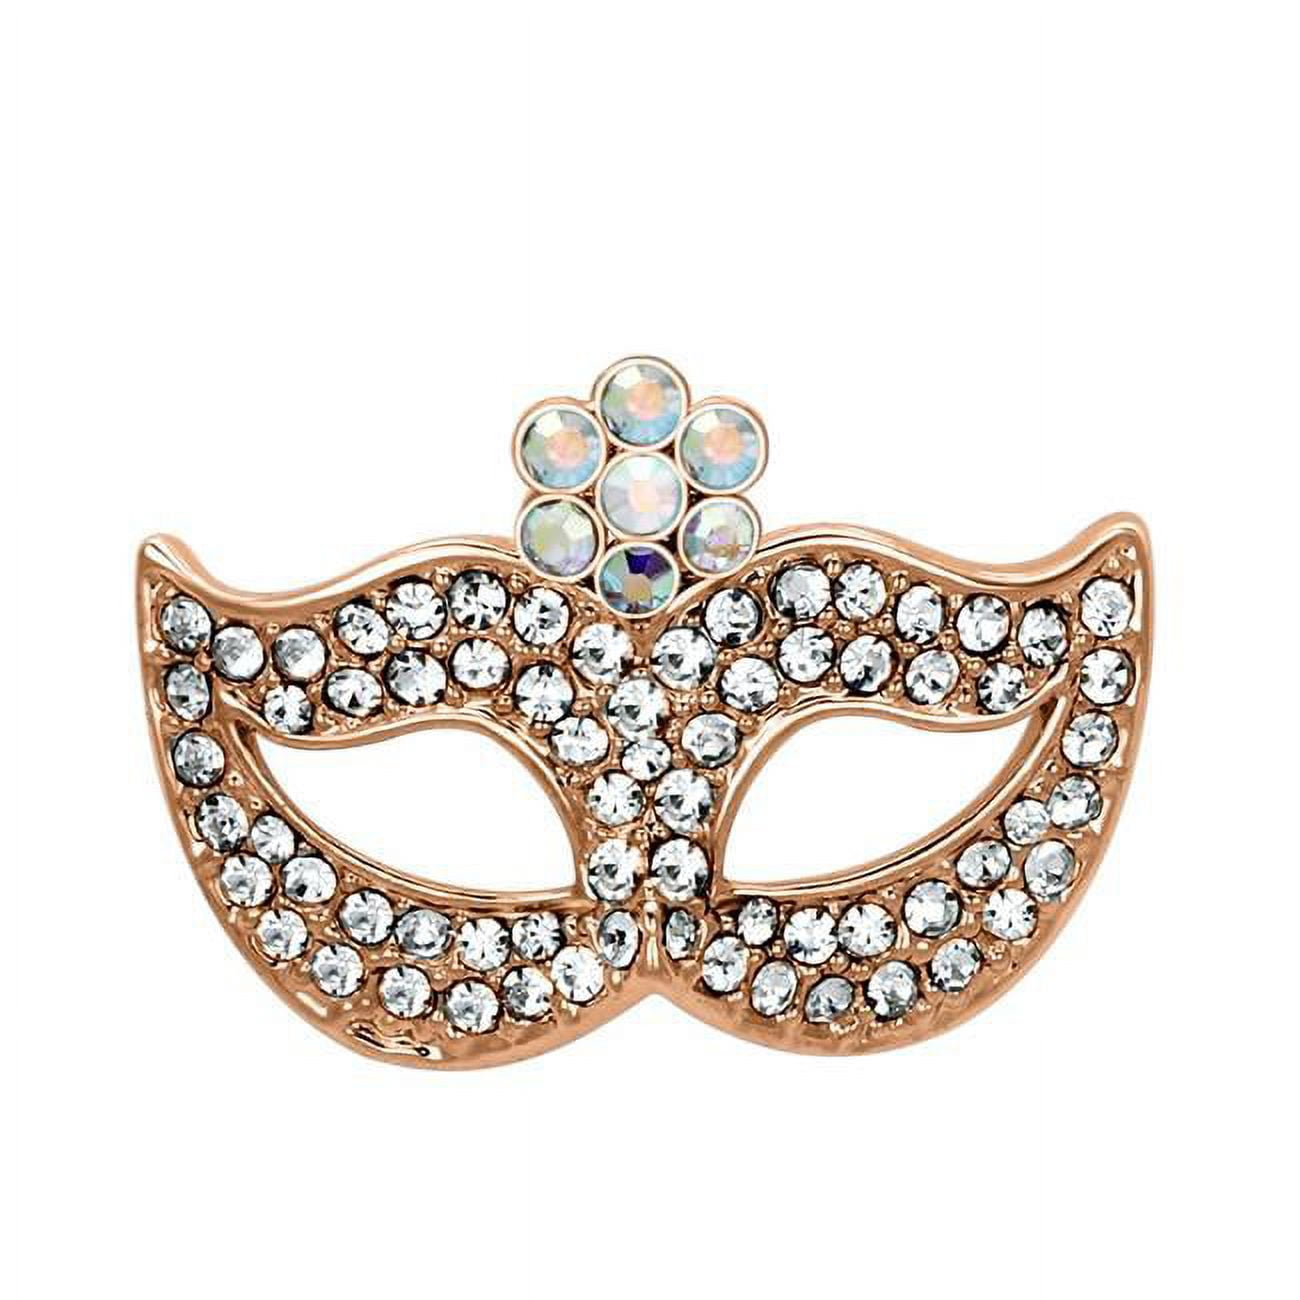 Picture of Alamode LO2807 Women Imitation Rhodium White Metal Brooches with Top Grade Crystal in Aurora Borealis Rainbow Effect